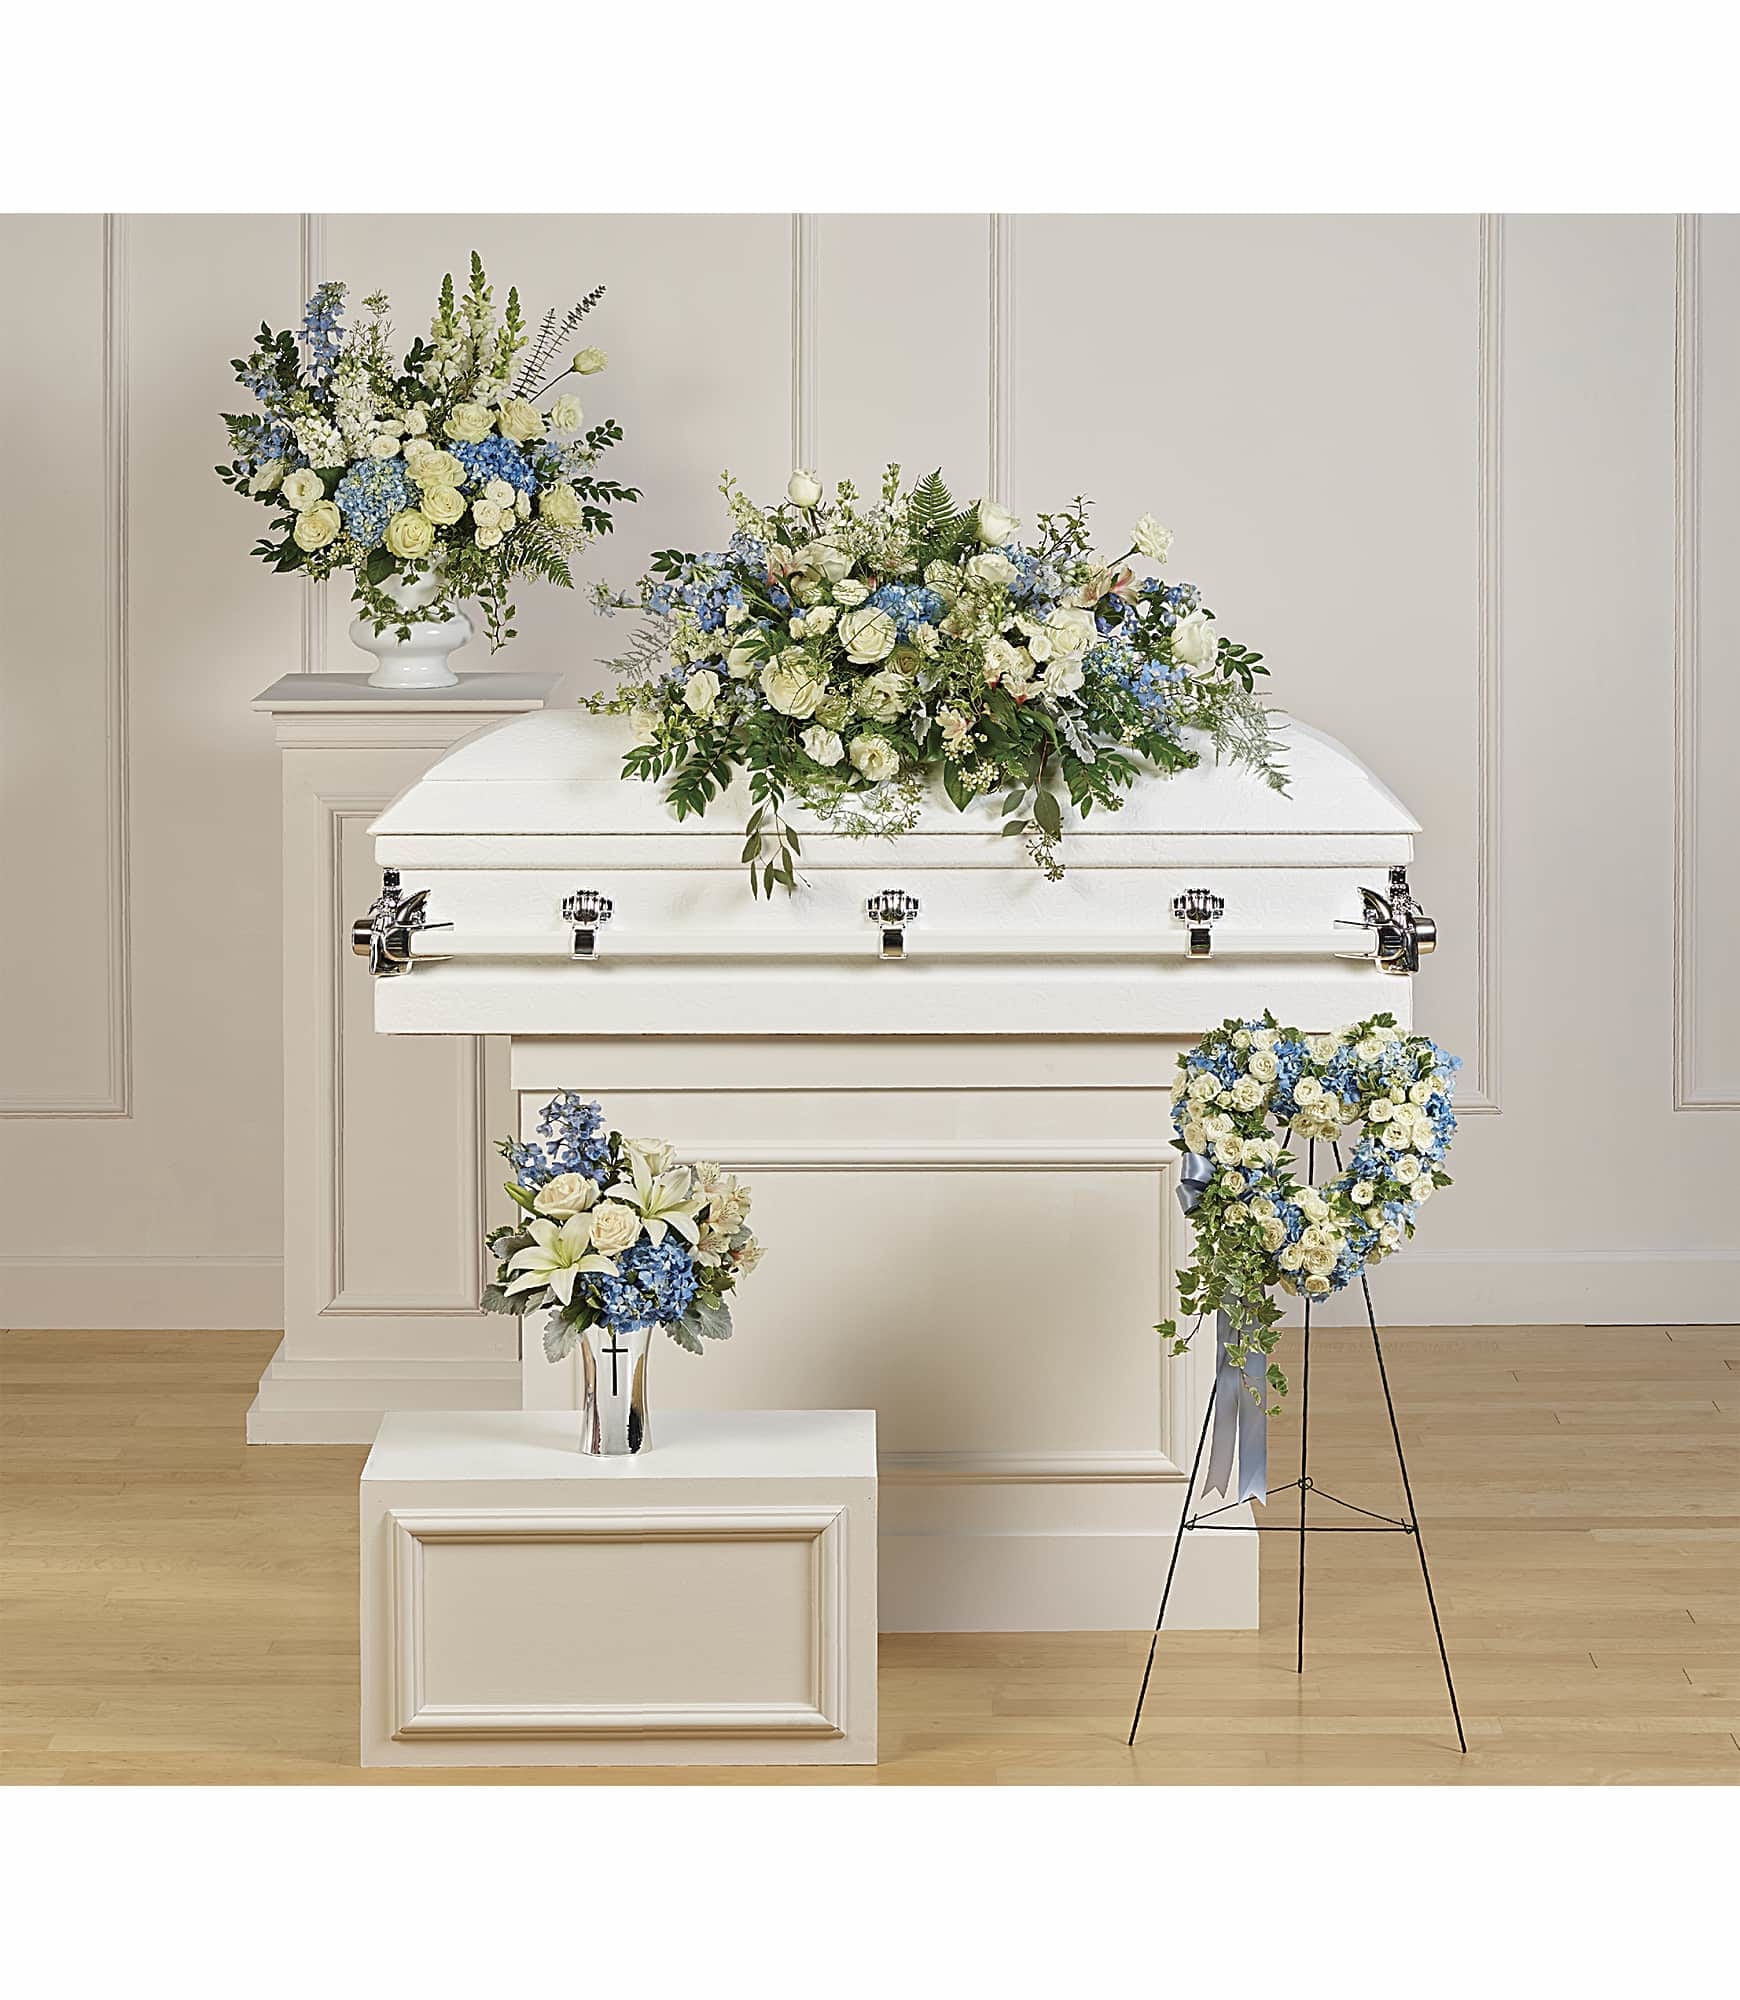 Tender Remembrance Collection - Inspired by beautiful blue skies, this collection of four hand-made sympathy pieces brings a sense of peace and light to the service. 